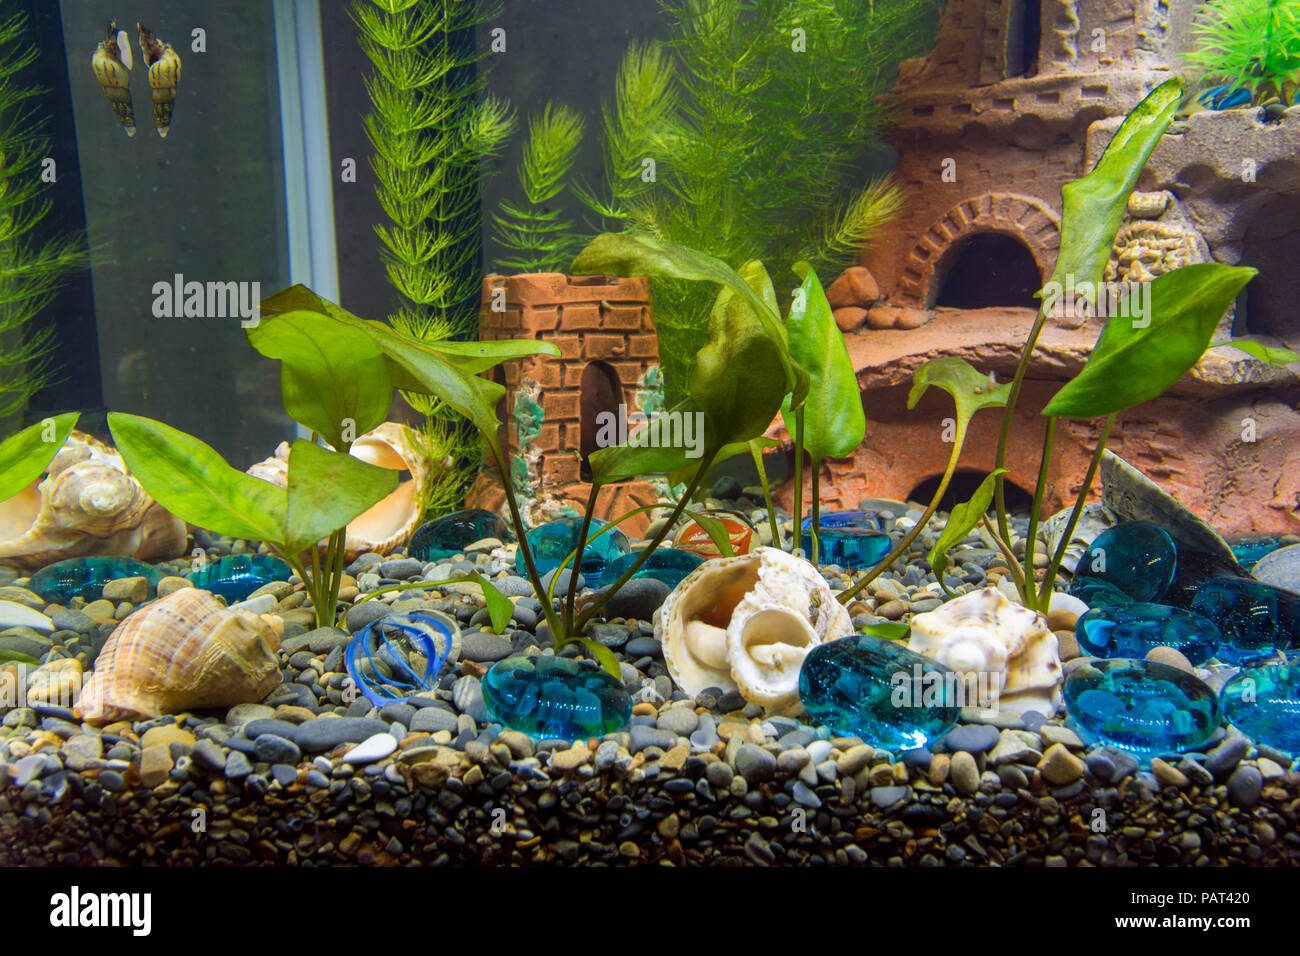 Newly planted shrubs of cryptocoryn in a new aquarium Stock Photo